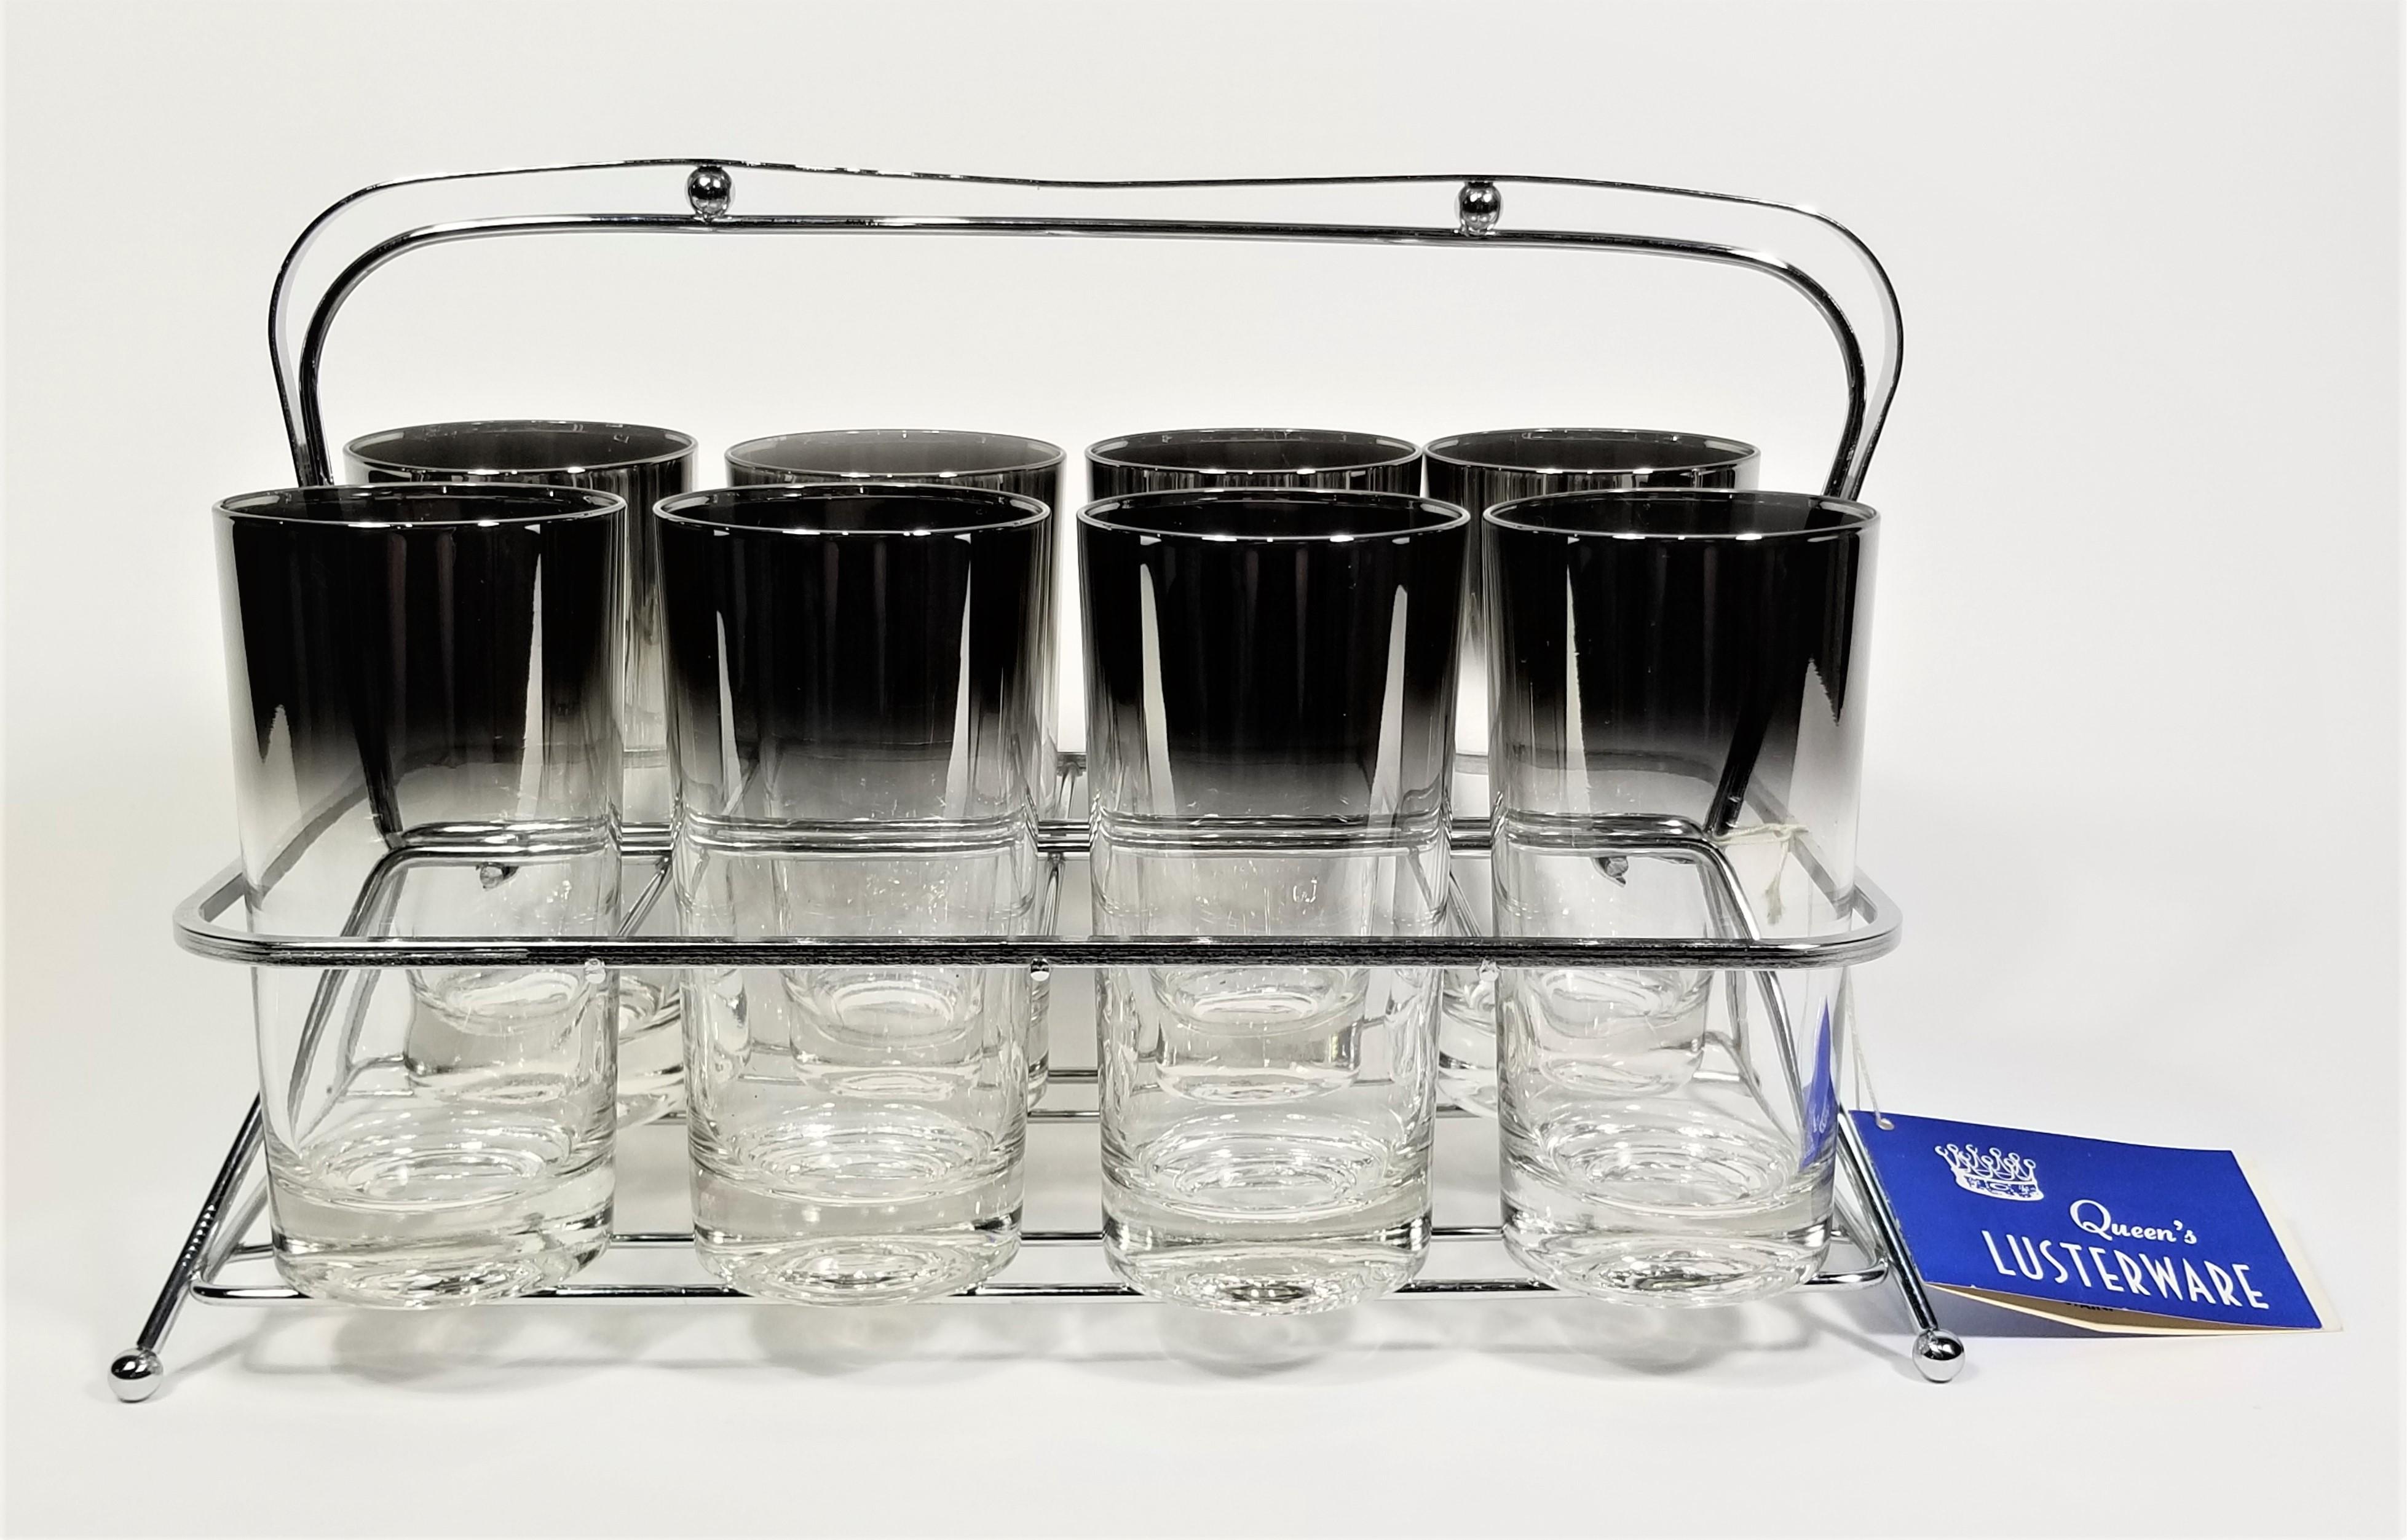  Mid Century Dorothy Thorpe style glassware barware. Set of 8. Excellent condition. Unused still retains original tag. 

Measurements:
Rack height: 8.75 inches
Rack width: 13.5 inches
Rack depth: 6.75 inches

Glass height: 5.63 inches
Glass